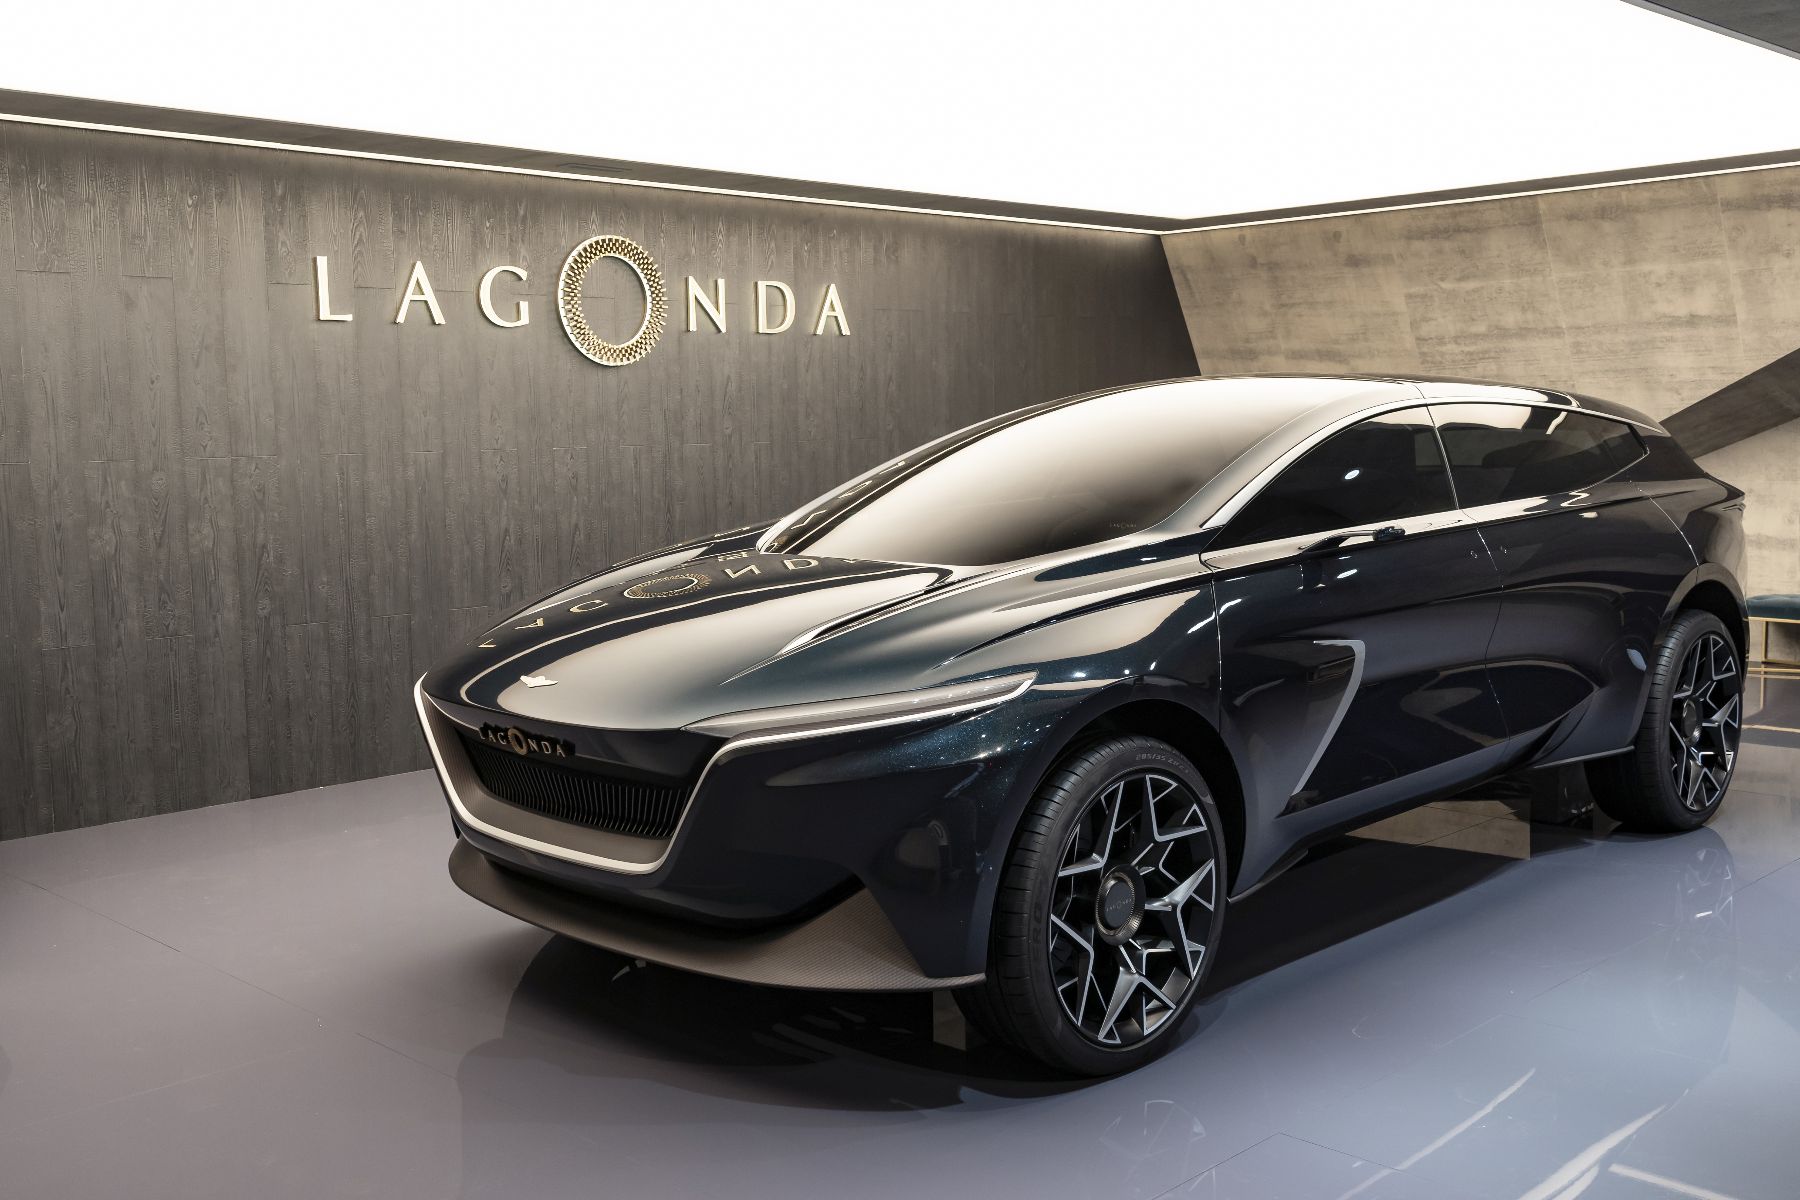 Aston Martin Lagonda all terrain 2020 front side view upcoming electric cars in 2020